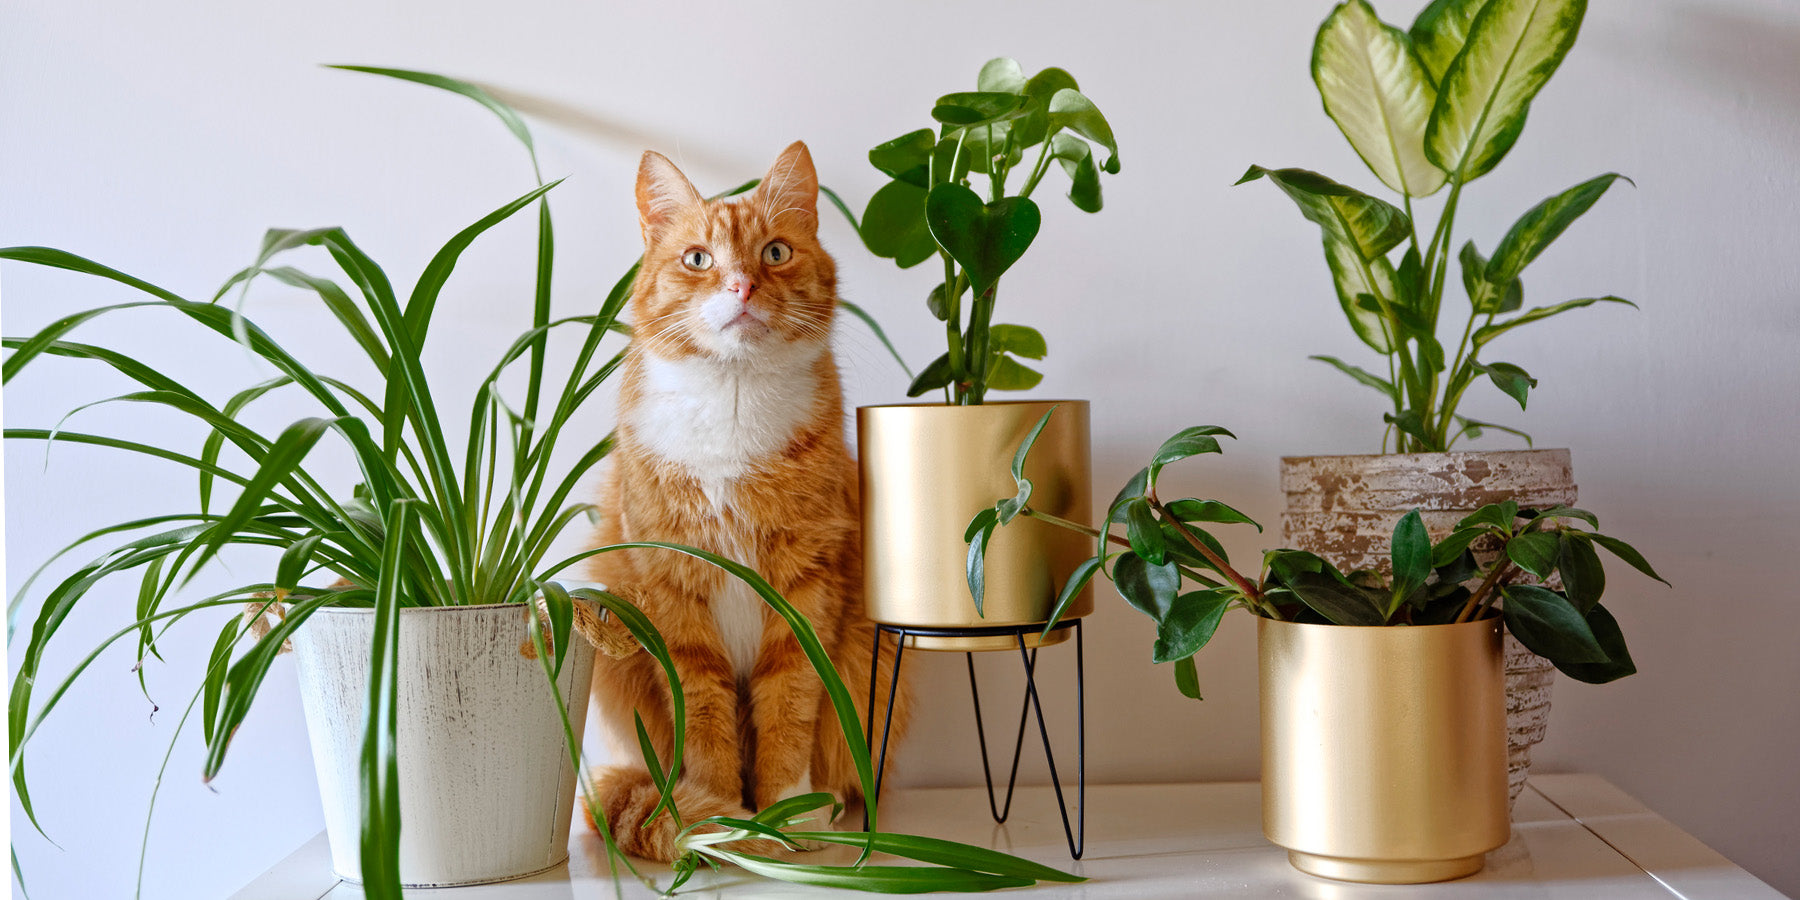 What Indoor Plants are Safe For Cats?